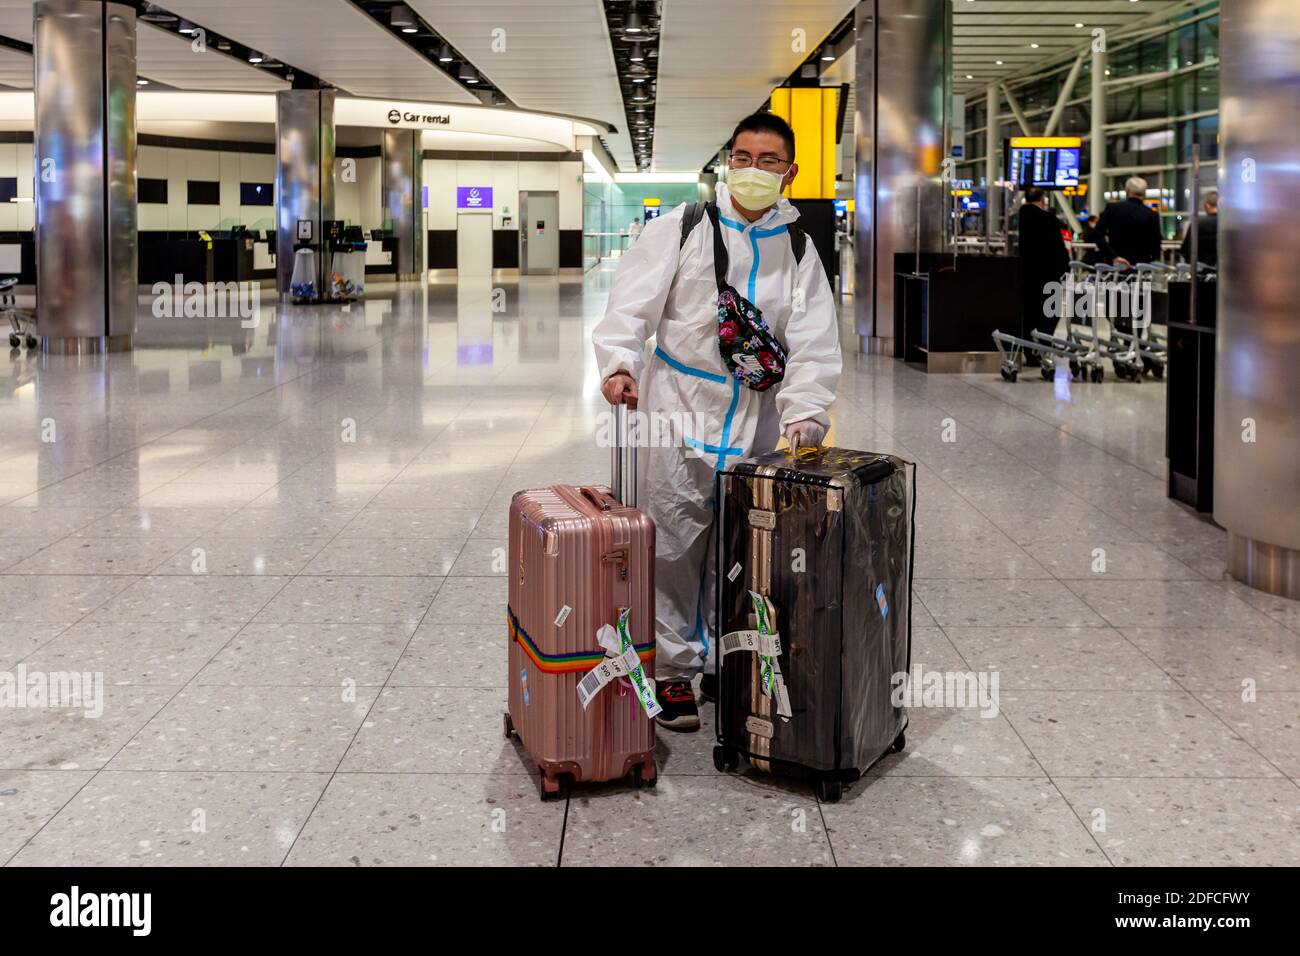 A Tourist Arrives From Asia In A Disposable Hazmat Protective Suit At Heathrow Airport During The Covid 19 Pandemic, London, UK. Stock Photo